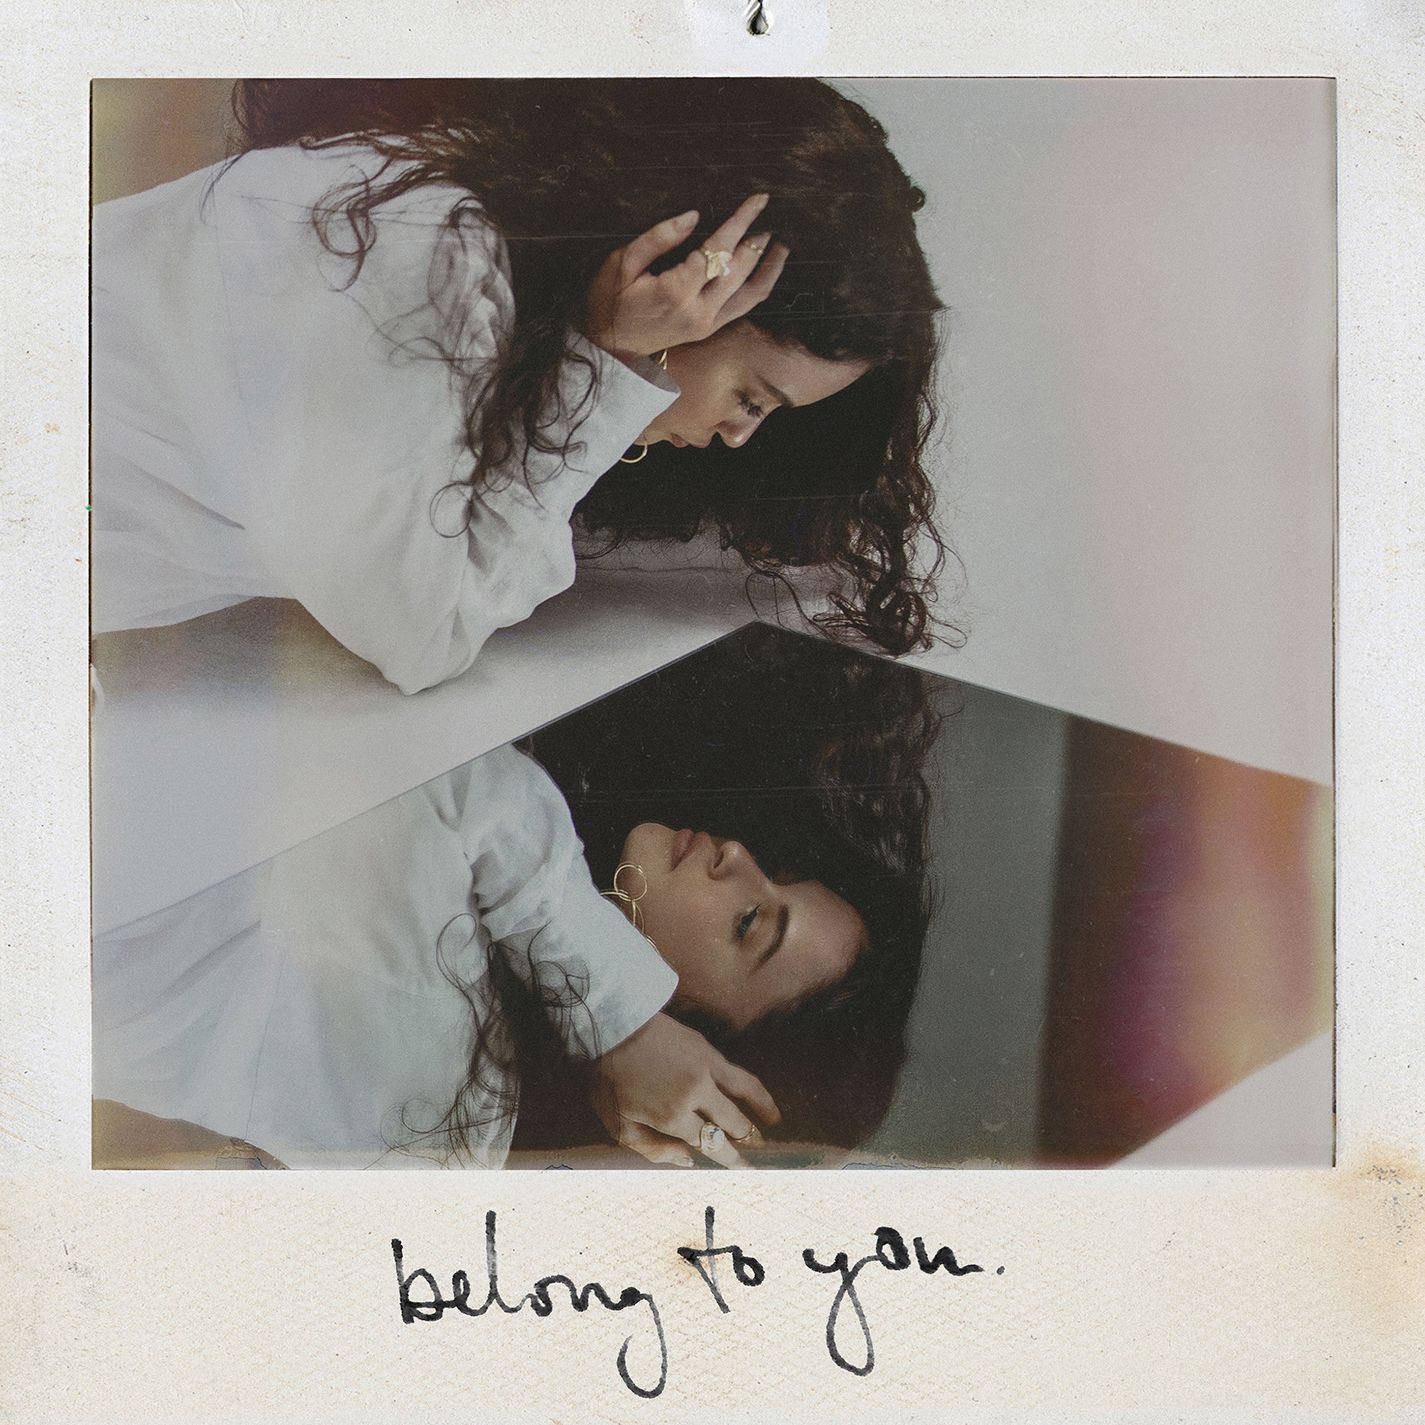 Art for Belong To You  [Remix] by Sabrina Claudio  ft. 6lack